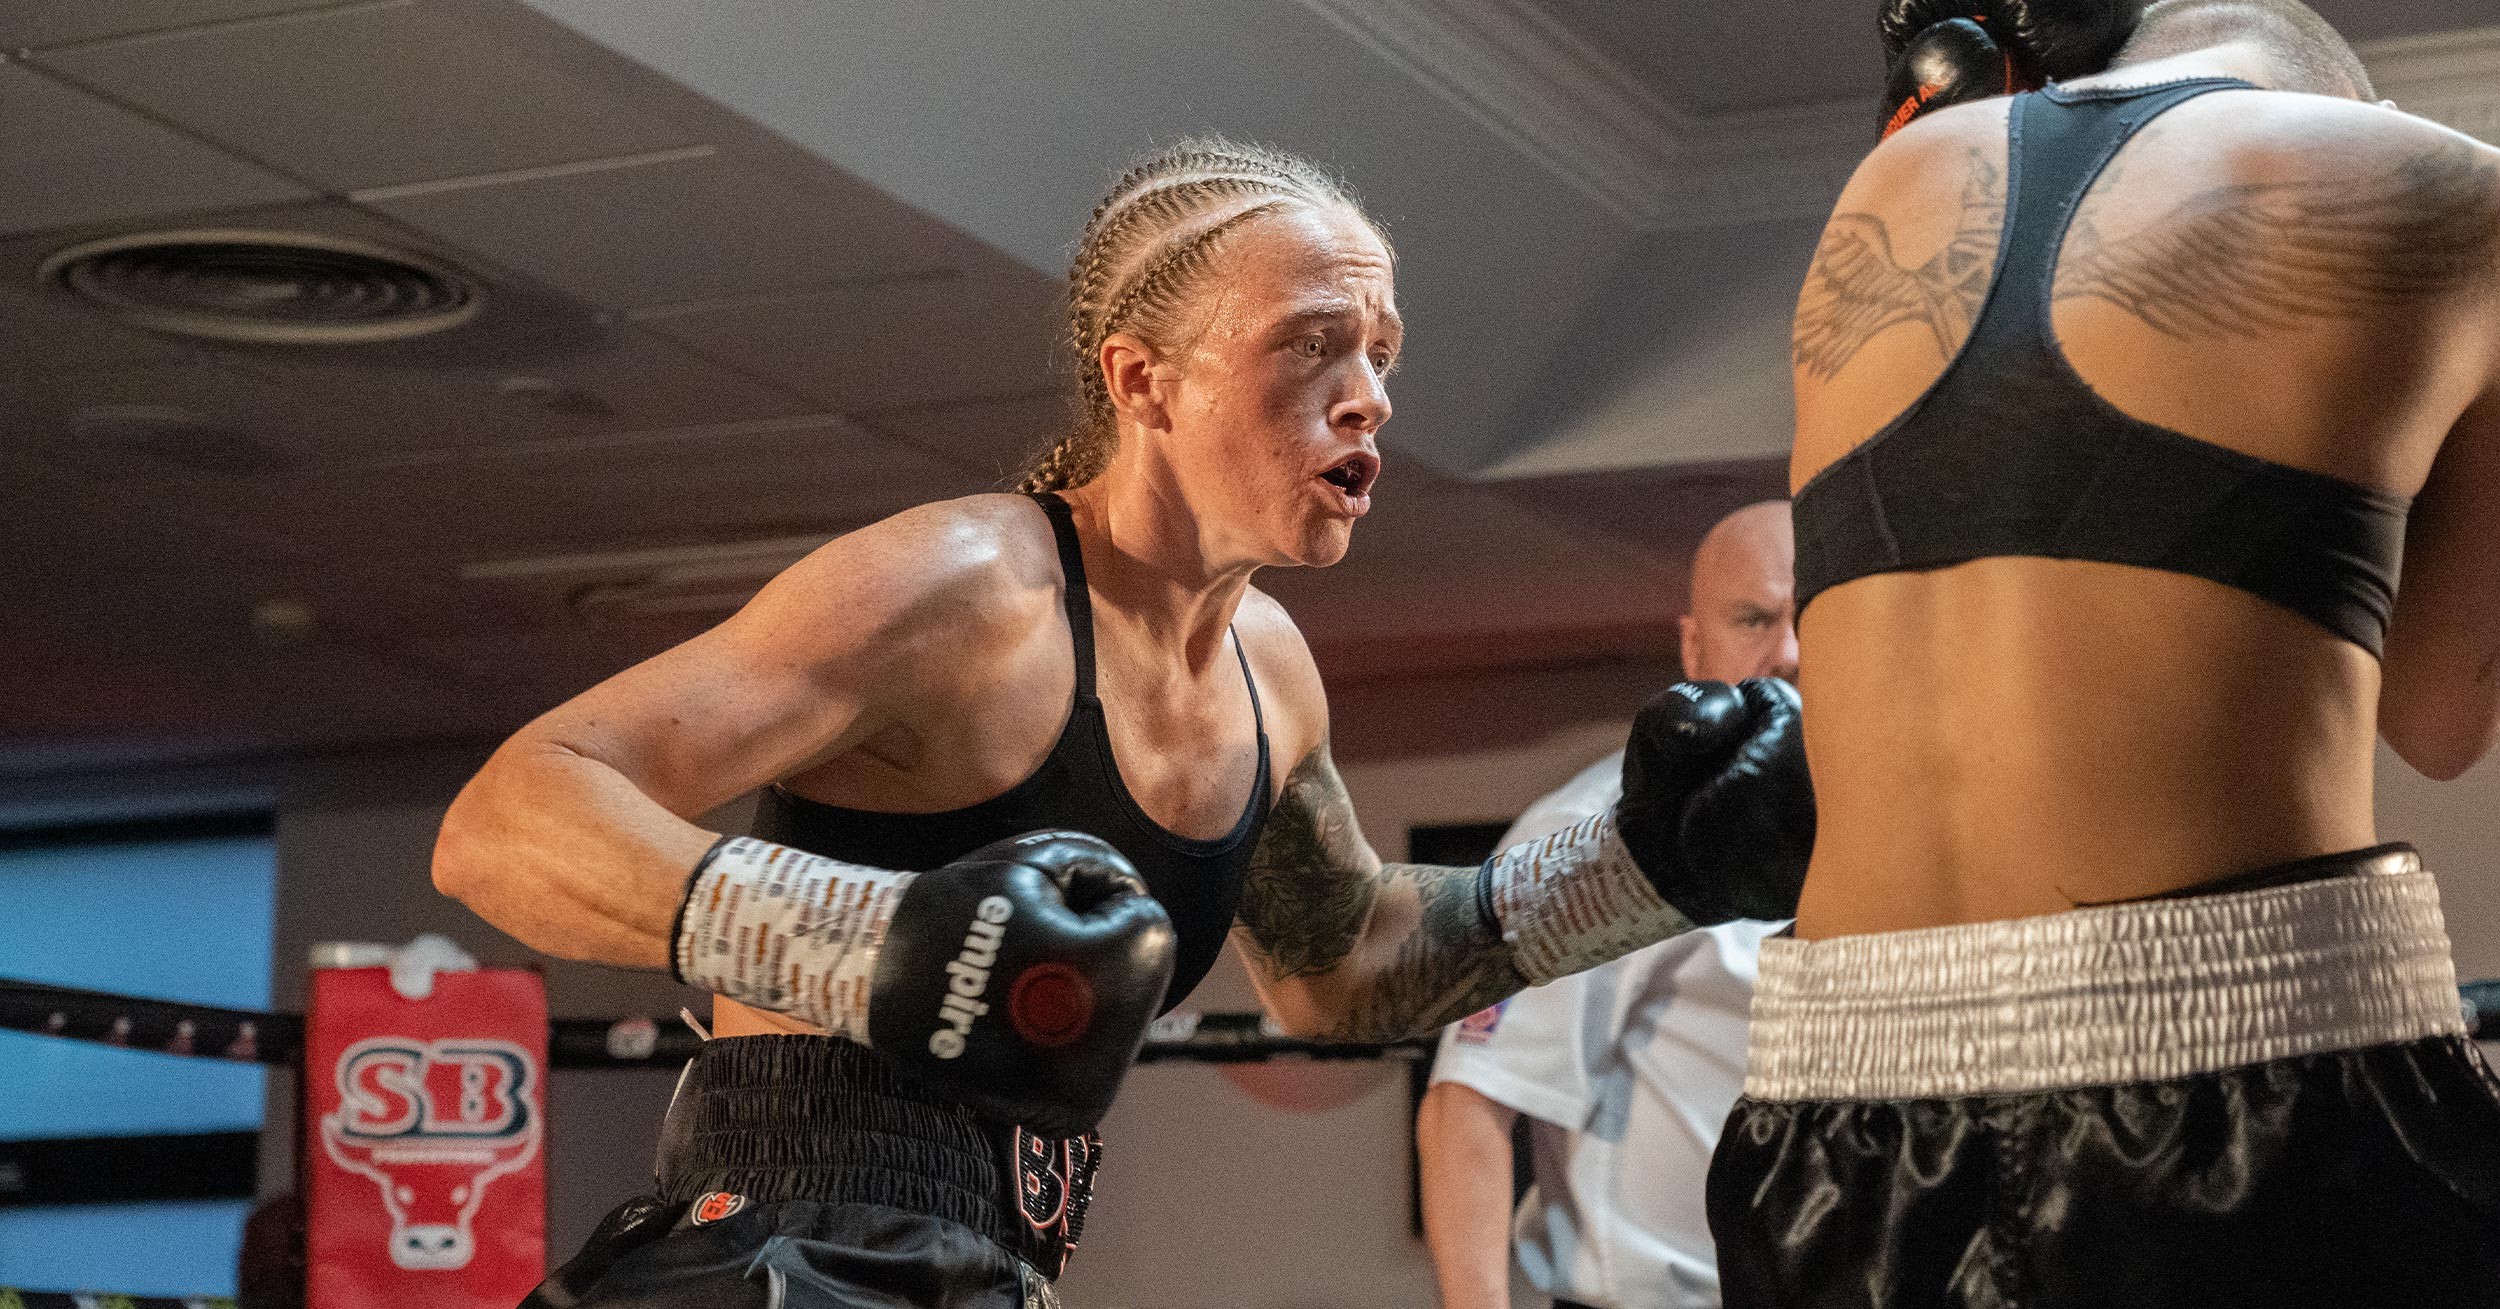 TEXO announces sponsorship of Sheffield’s first female professional boxer, Bree Wright